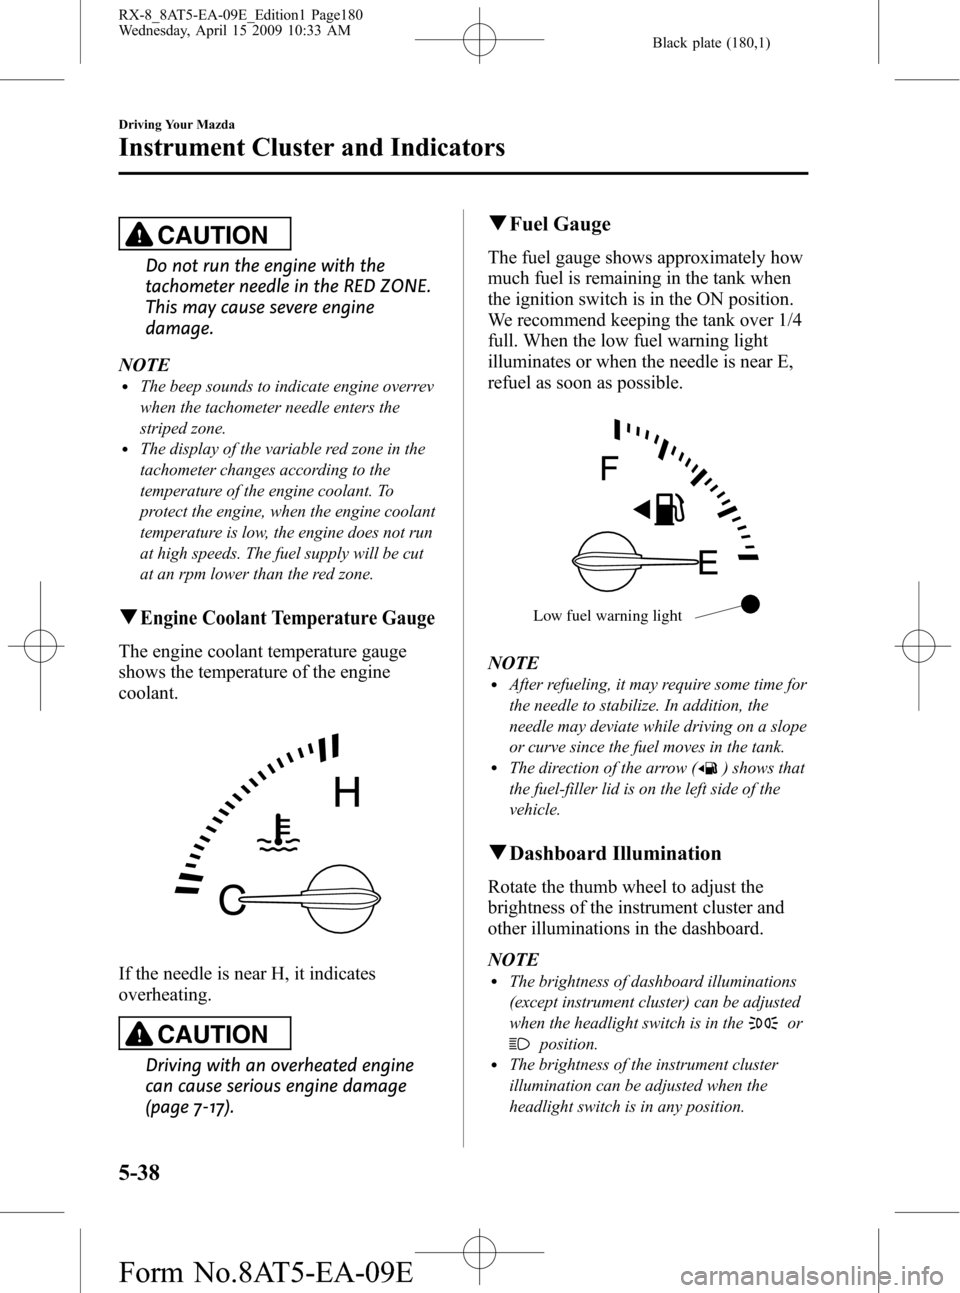 MAZDA MODEL RX 8 2010  Owners Manual (in English) Black plate (180,1)
CAUTION
Do not run the engine with the
tachometer needle in the RED ZONE.
This may cause severe engine
damage.
NOTE
lThe beep sounds to indicate engine overrev
when the tachometer 